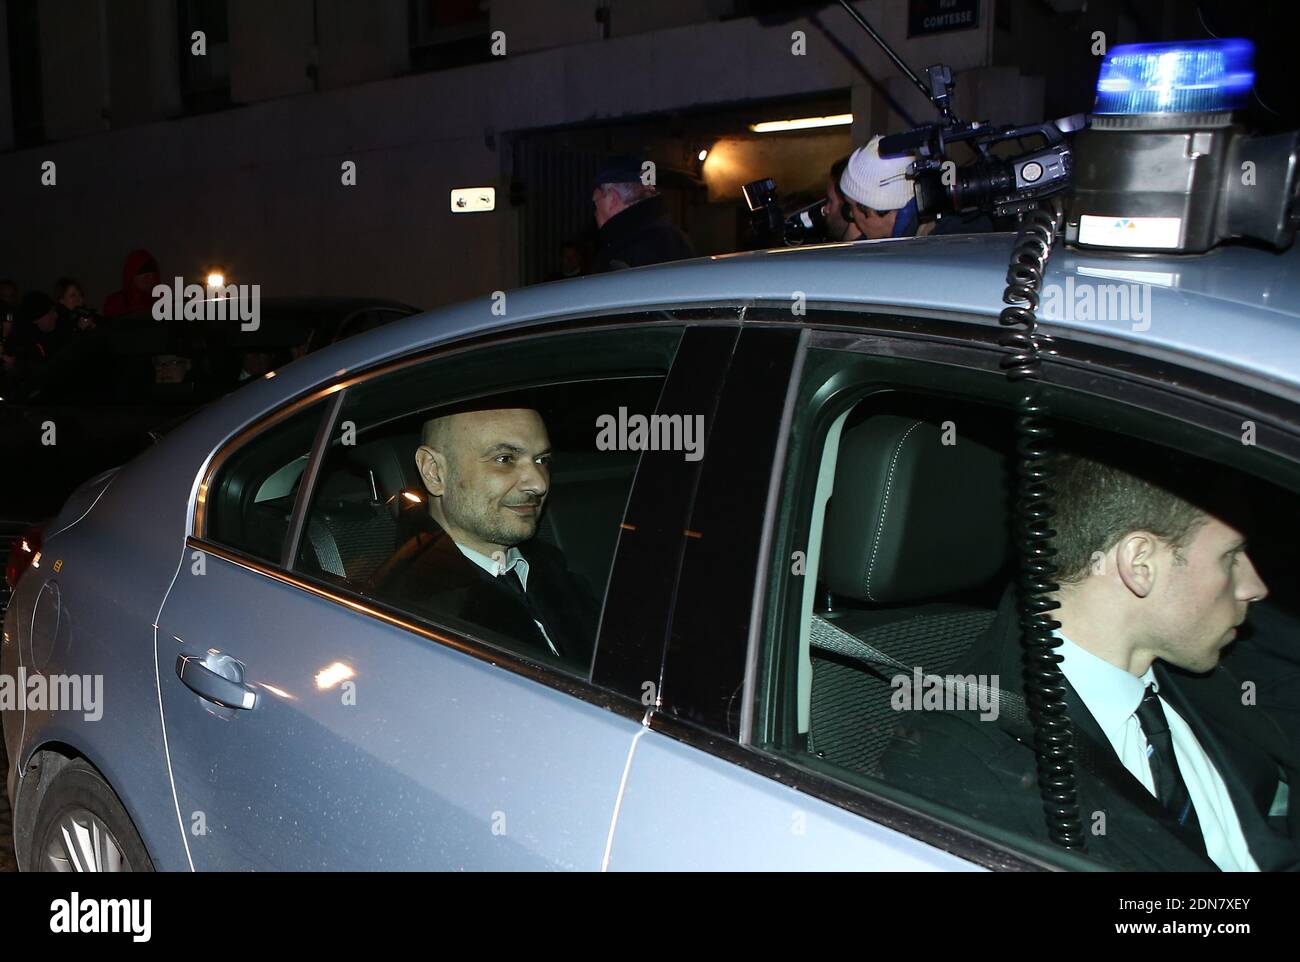 Dominique Strauss-Kahn's lawyer Richard Malka arriving at the Lille Criminal Court for the Carlton case trial opening, in Lille, northern France on February 2, 2015. The case is named after a hotel at the centre of an alleged prostitution network with a cast of accused including former IMF managing director Dominique Strauss-Kahn, a police commissioner, the owner of a chain of brothels named Dodo la Saumure, a barrister, two luxury hotel directors and several freemasons. Photo by ABACAPRESS.COM Stock Photo